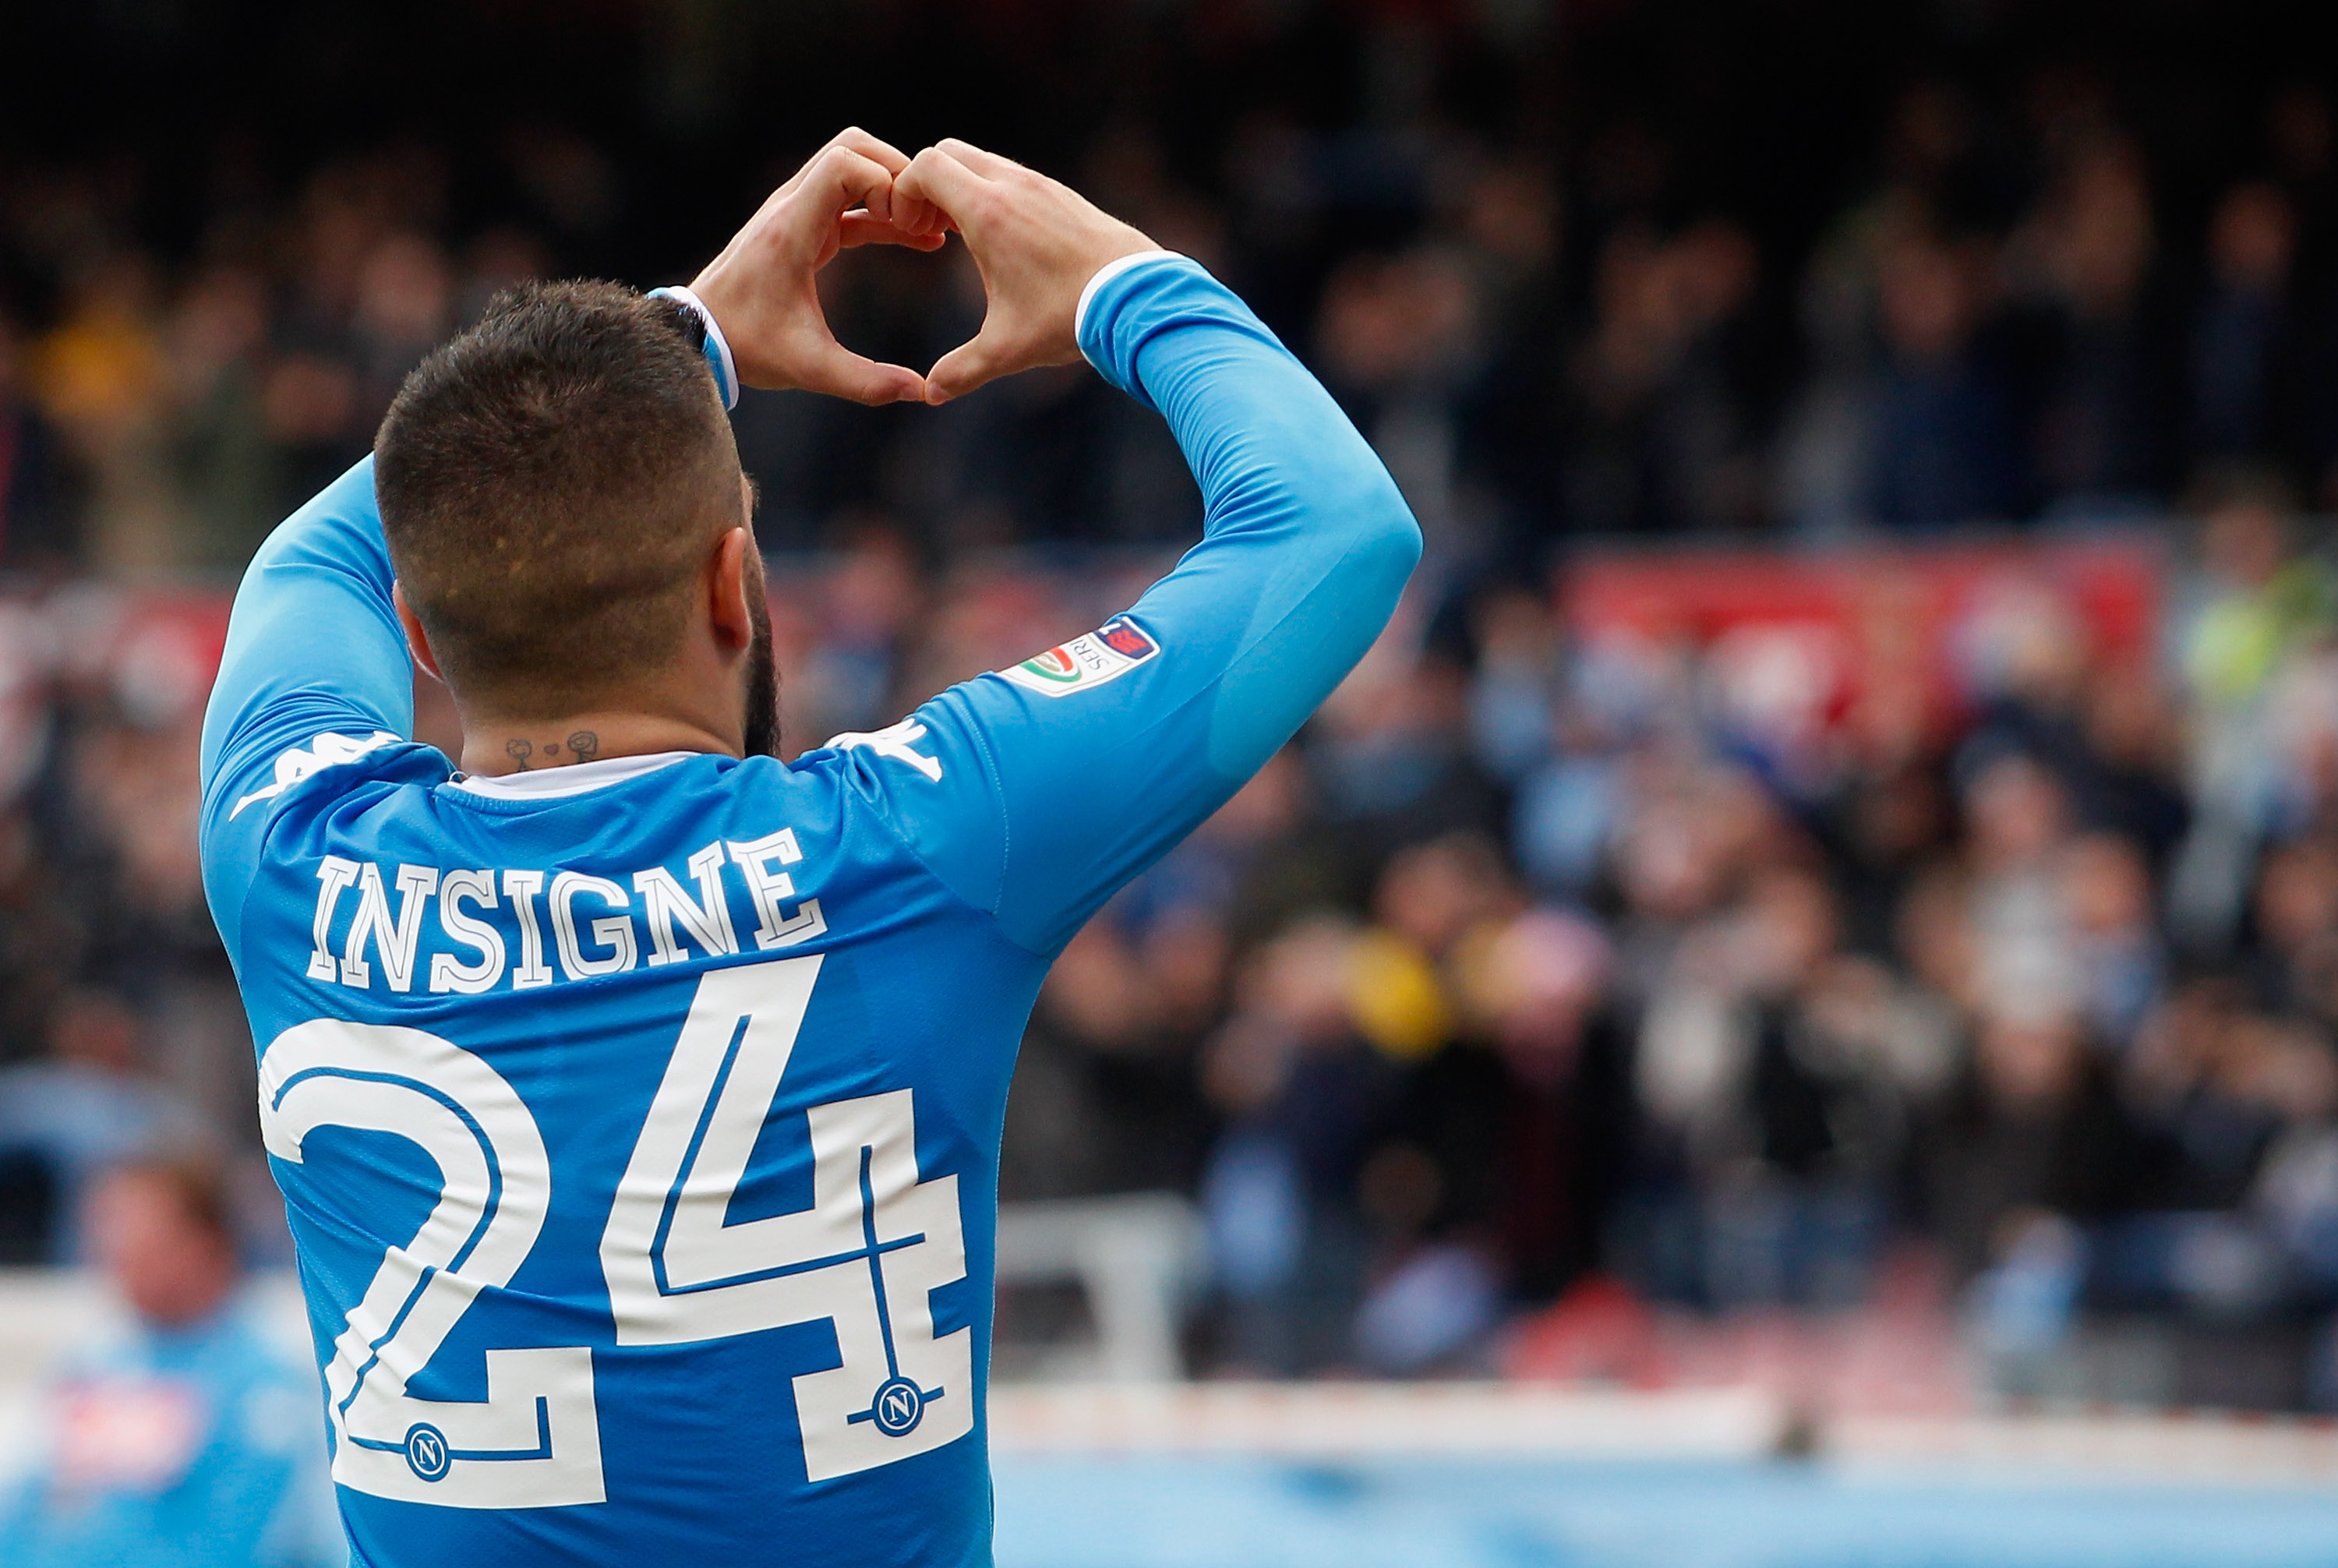 Insigne: “I want to play against Inter”